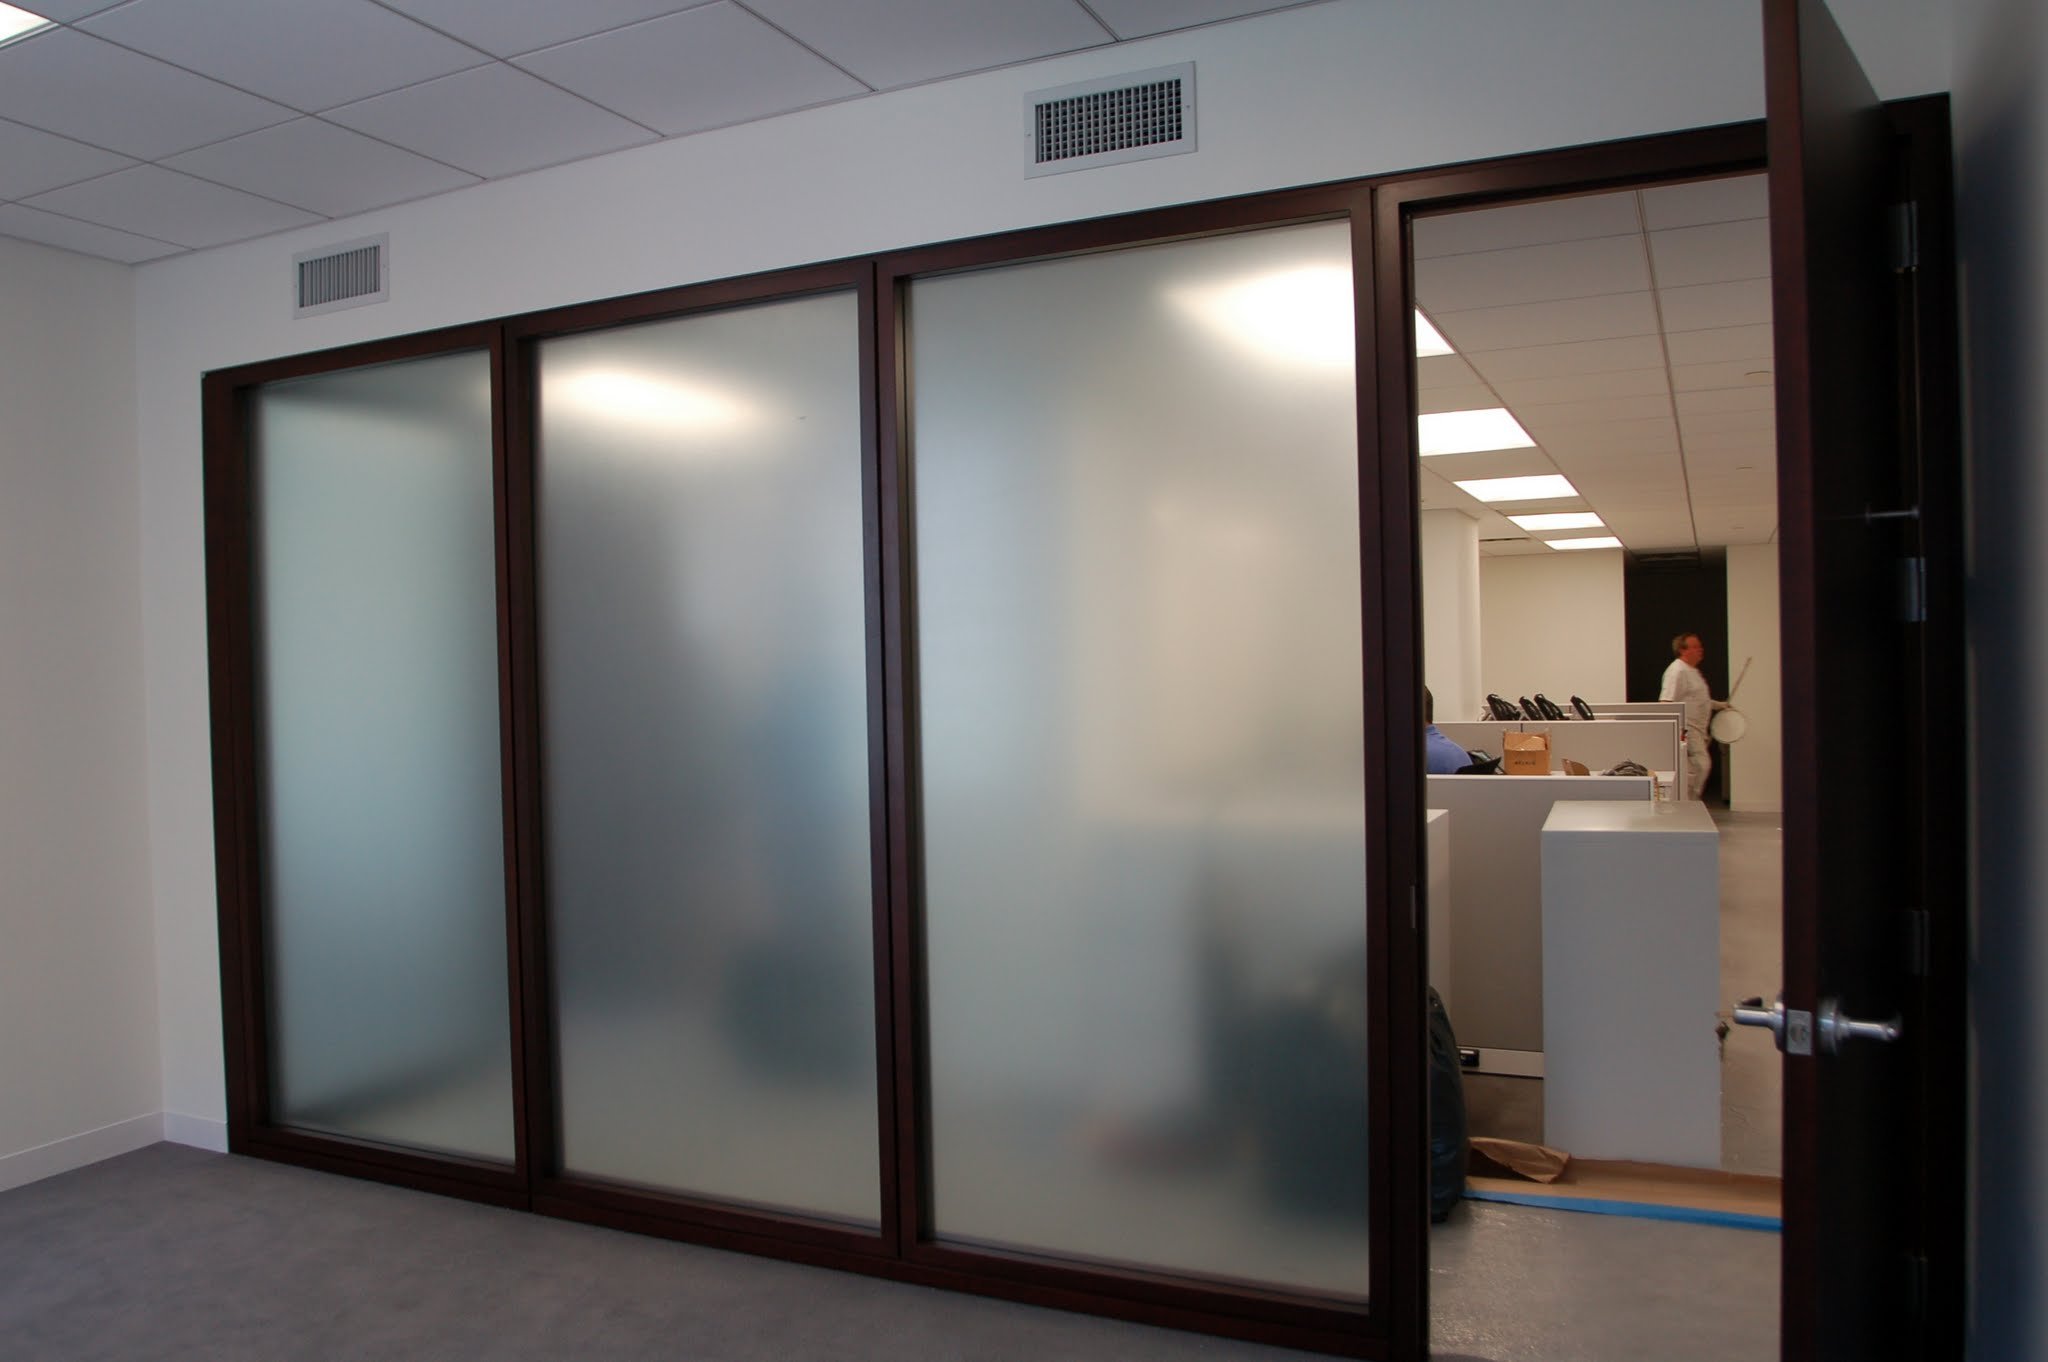  Project: Office PrivacyProduct: 3M Fasara Oslo SH2EMOS 